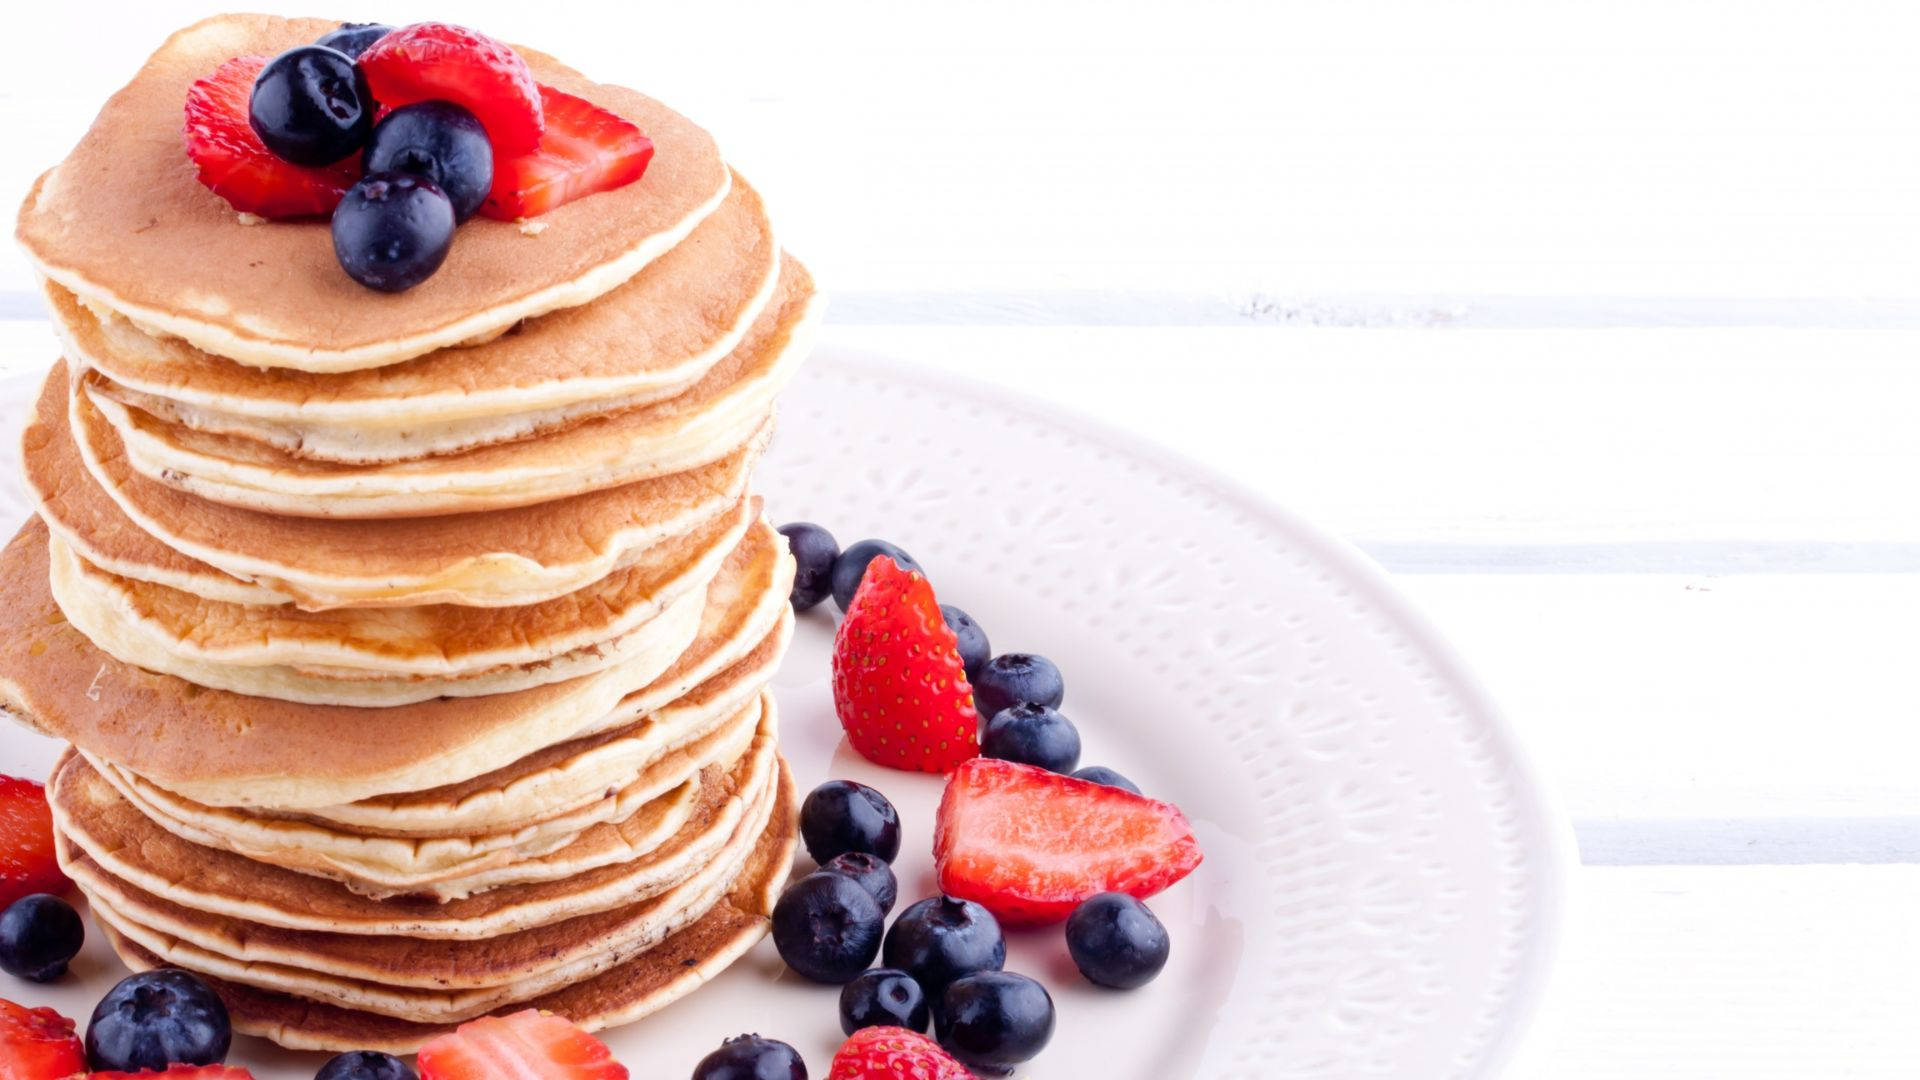 Pancakes Surrounded By Berries